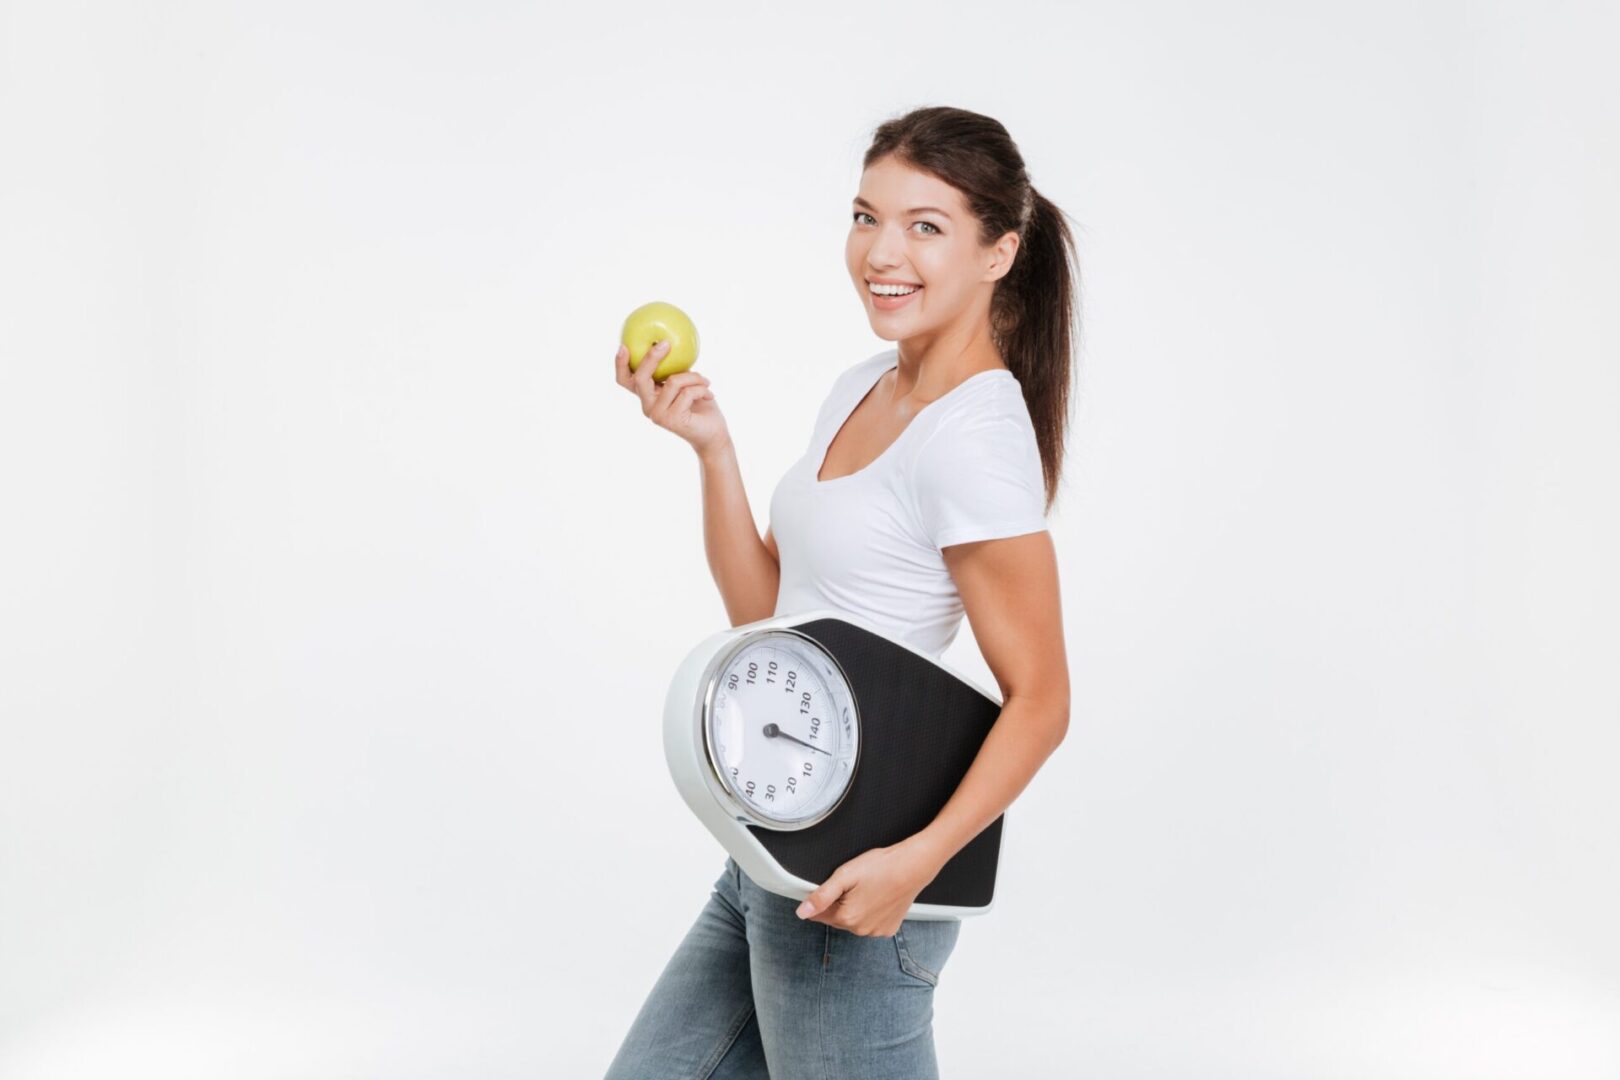 graphicstock-woman-holding-scale-and-apple-for-healthy-lifestyle-and-nutrition-isolated-over-white-background-looking-at-camera_HOxgRXH8ne-scaled